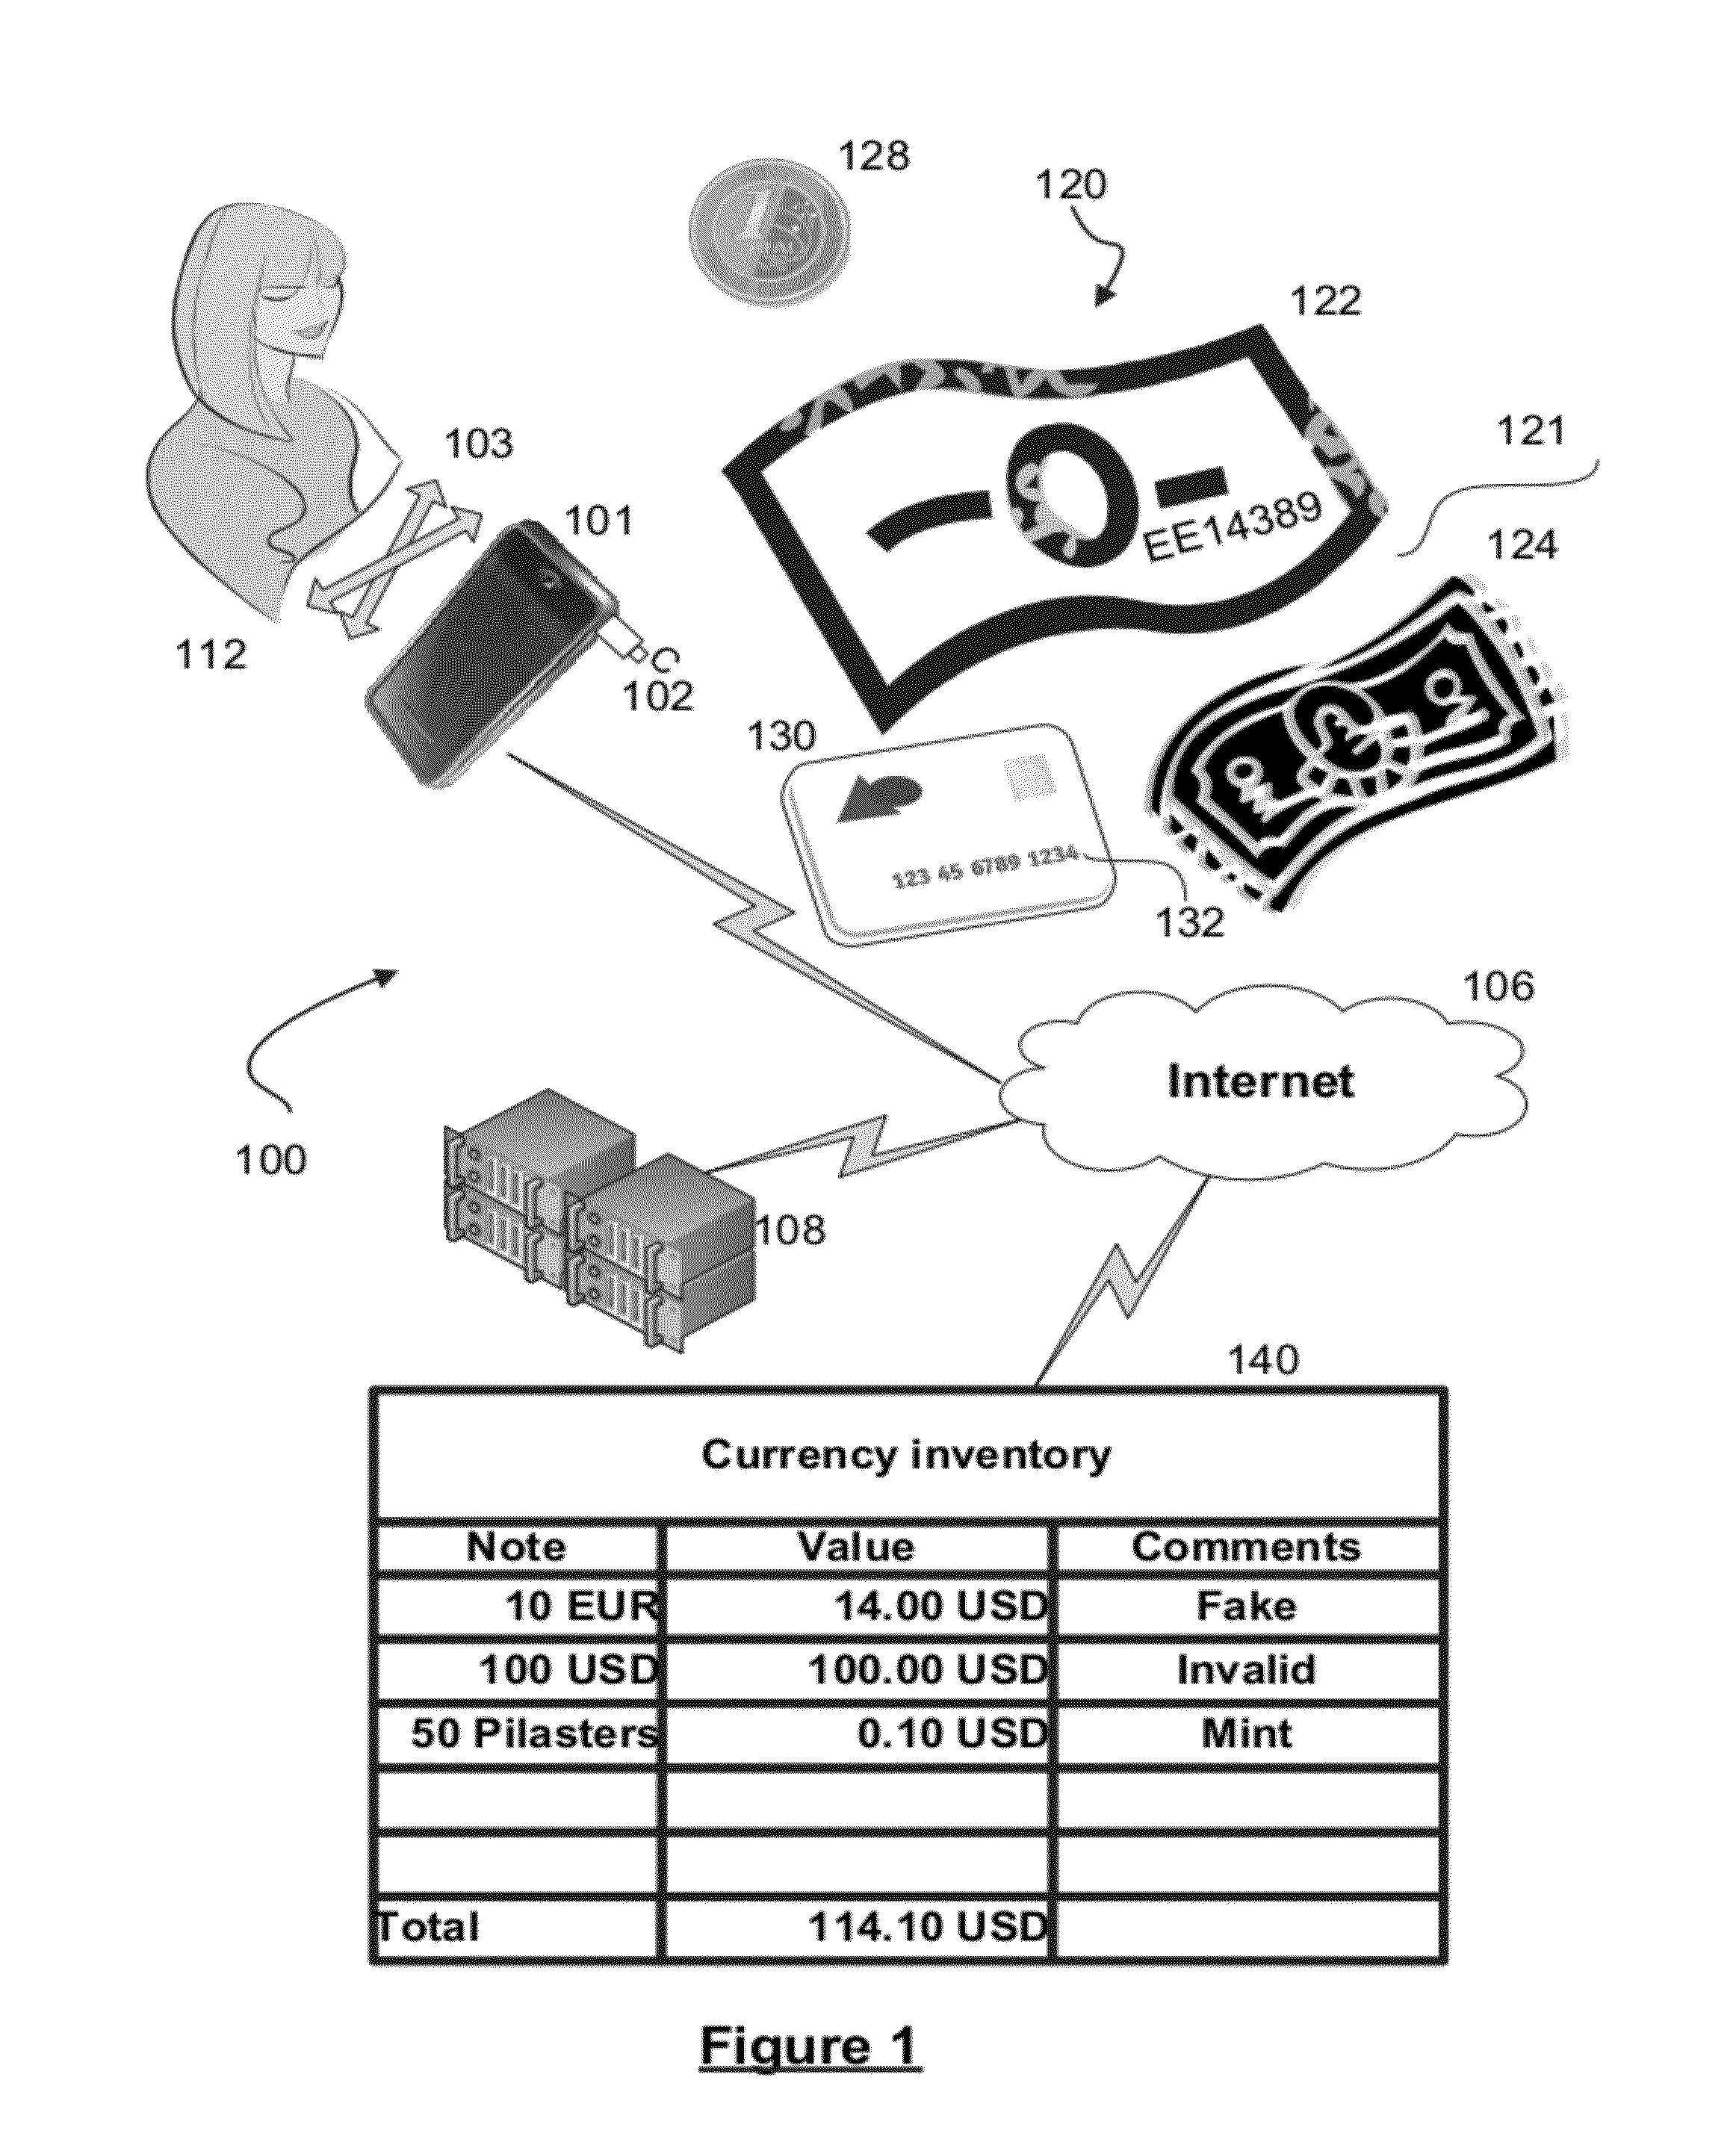 System and process for automatically analyzing currency objects